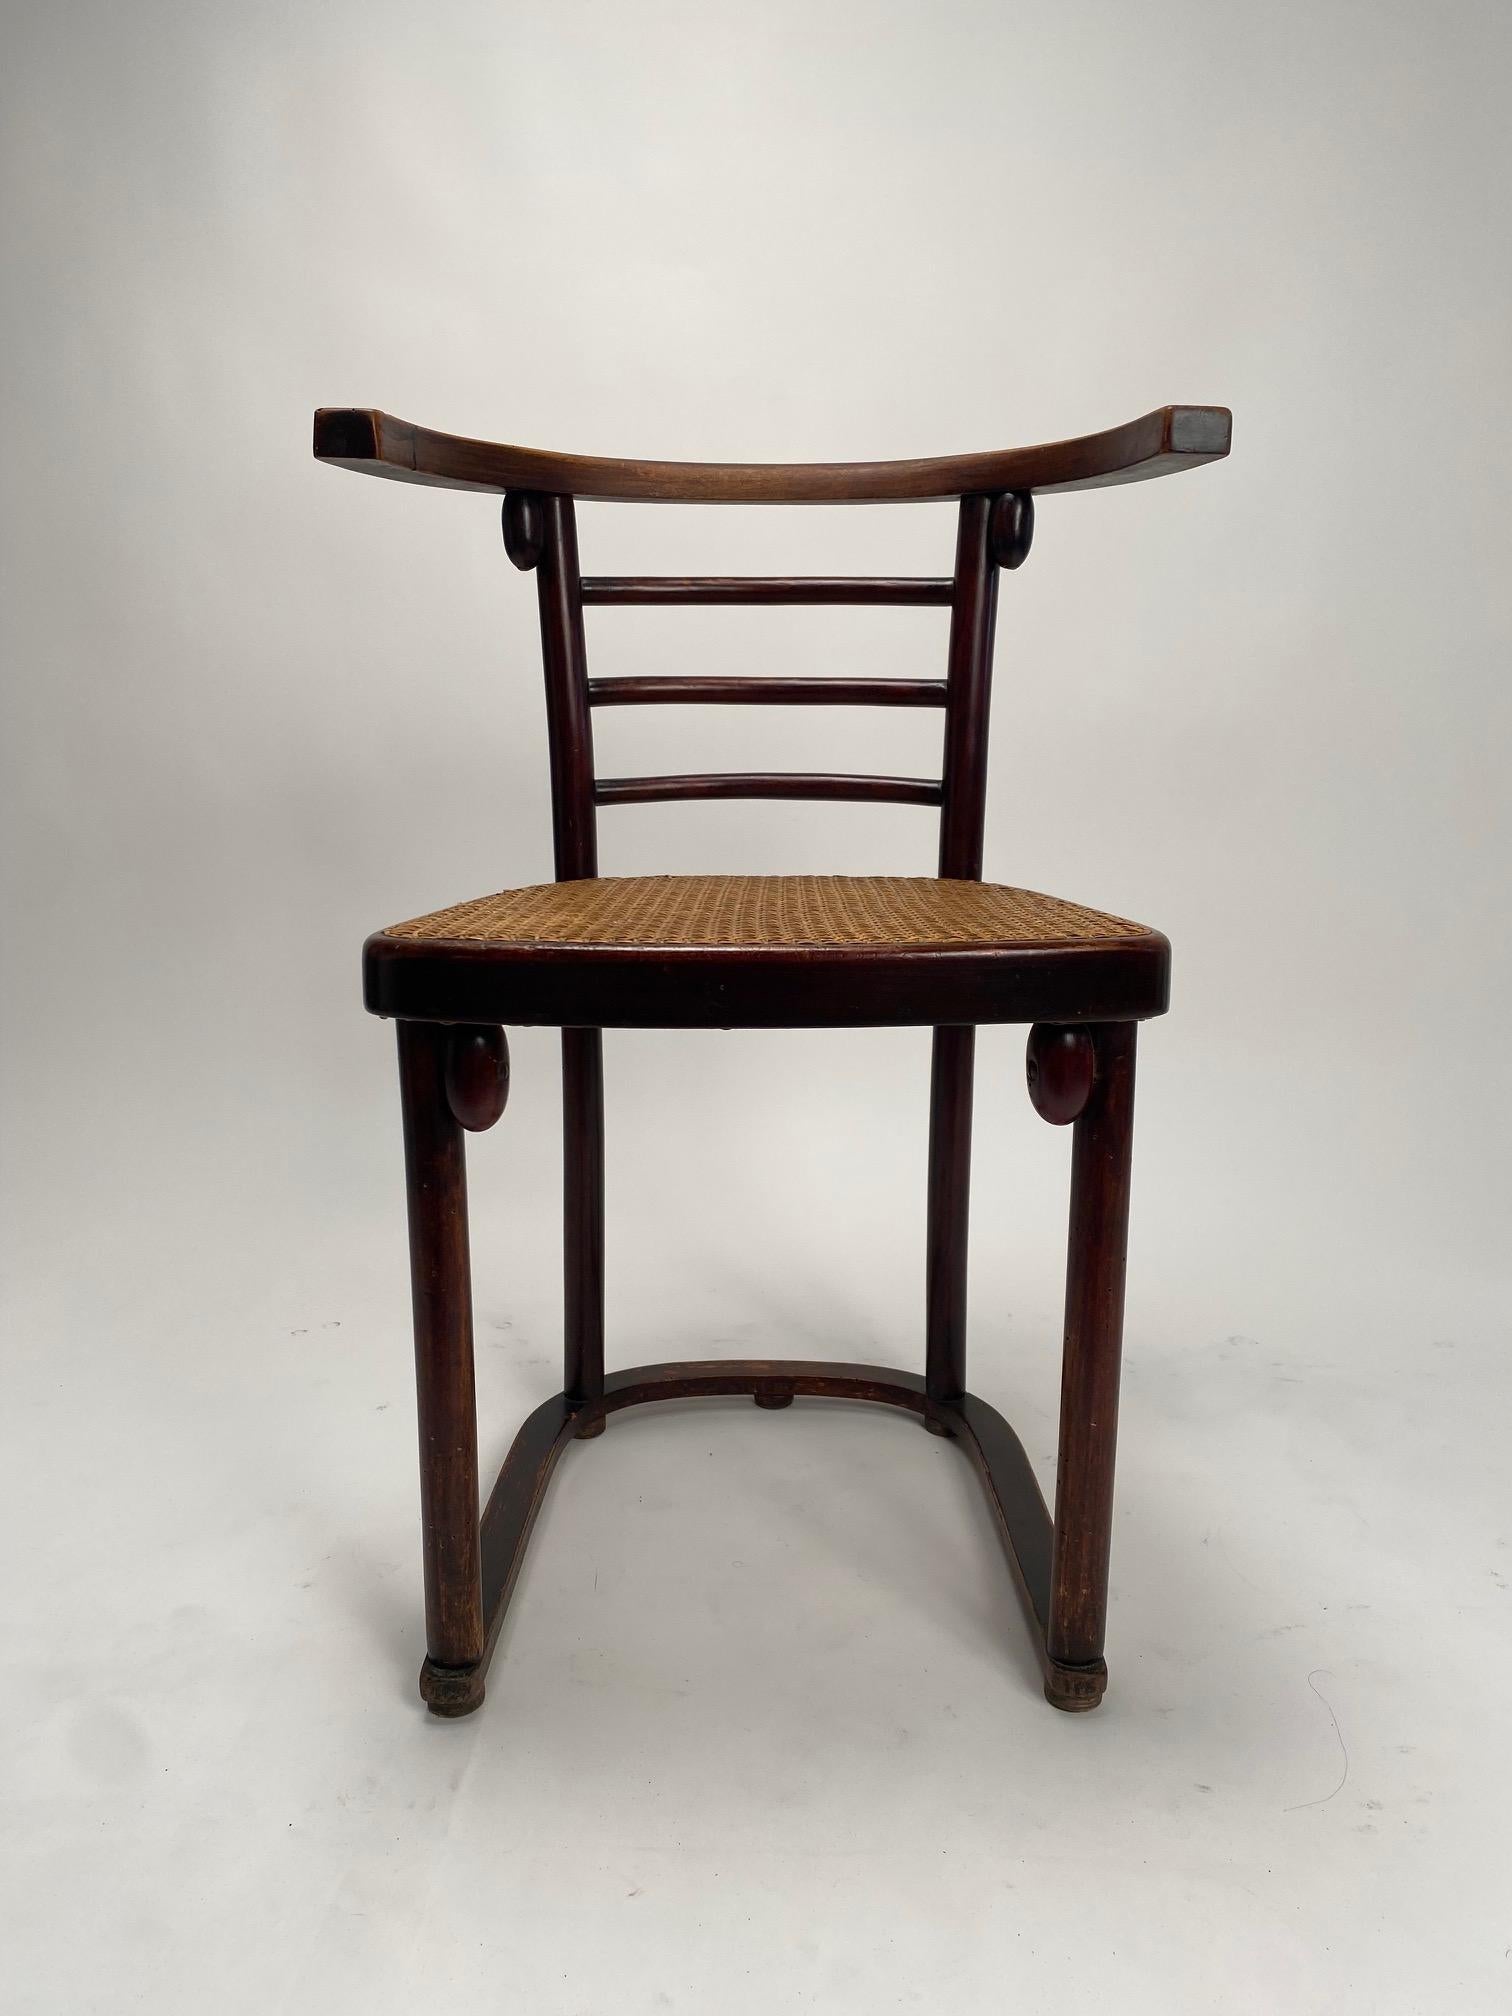 Four bentwood chairs mod. Fledermaus by Josef Hoffmann for Thonet, 1910s

It is one of the most famous creations of the Austrian architect Josef Hoffmann, one of the founding fathers of the Viennese Secession. built in the early 1900s, they were